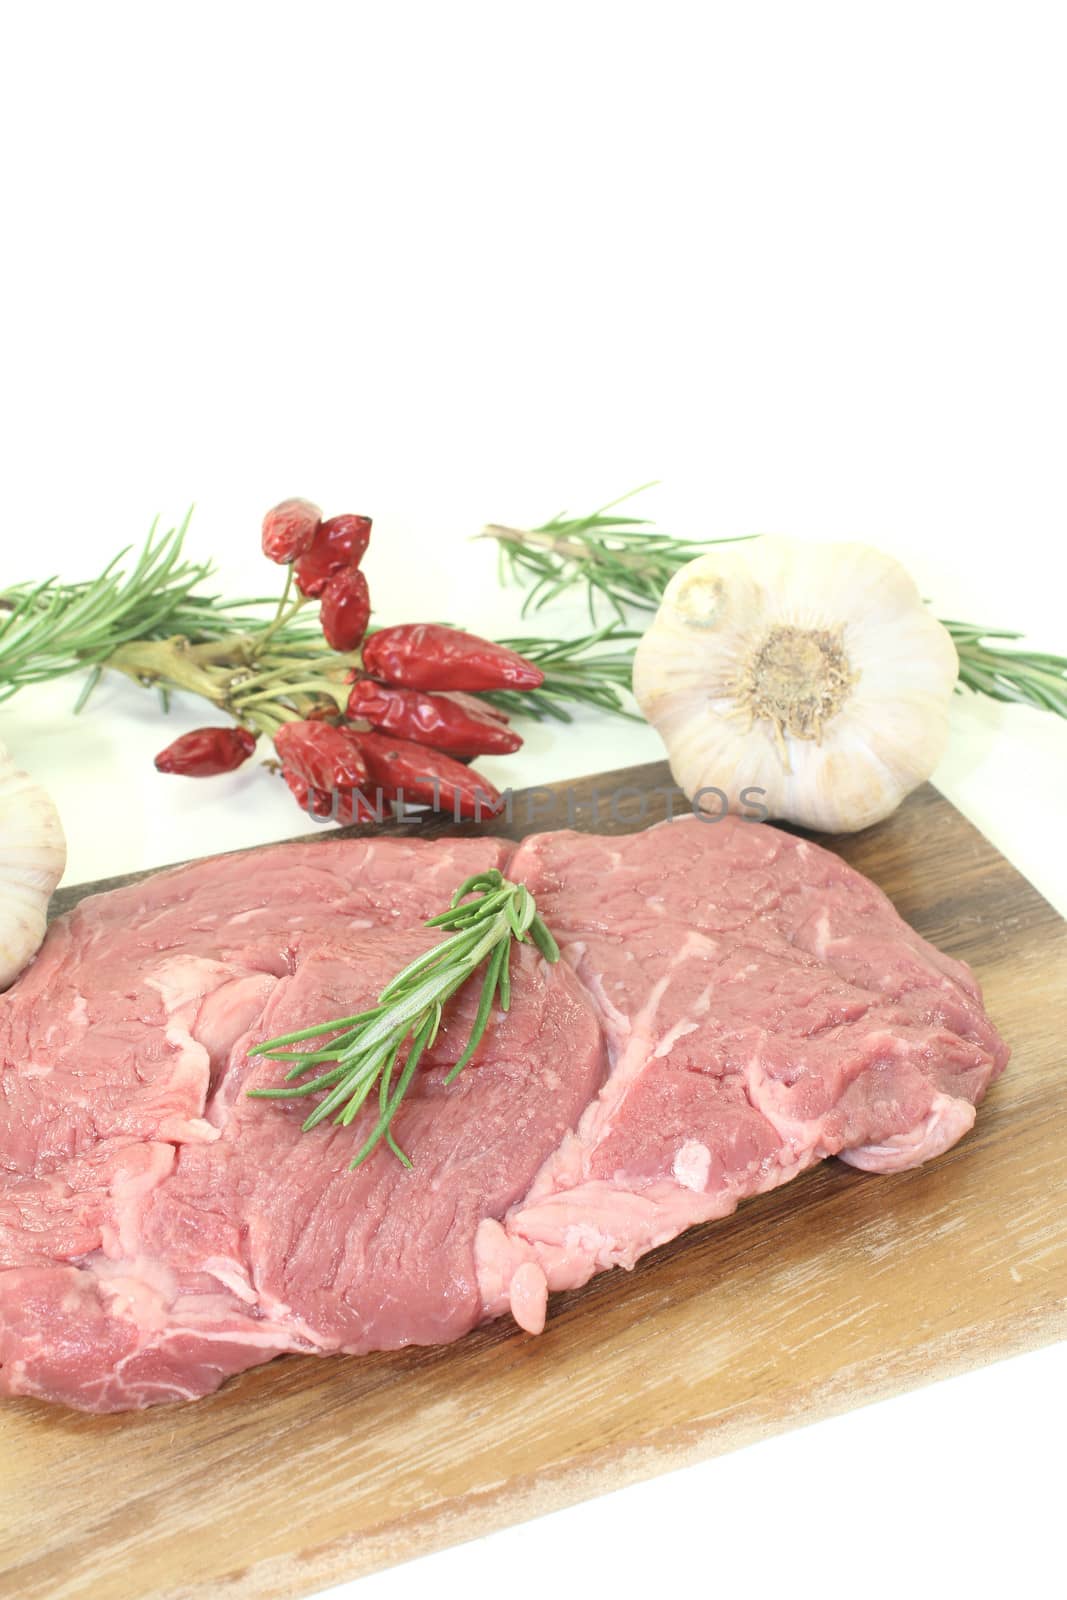 Ribeye steak with garlic, chilli and rosemary by discovery